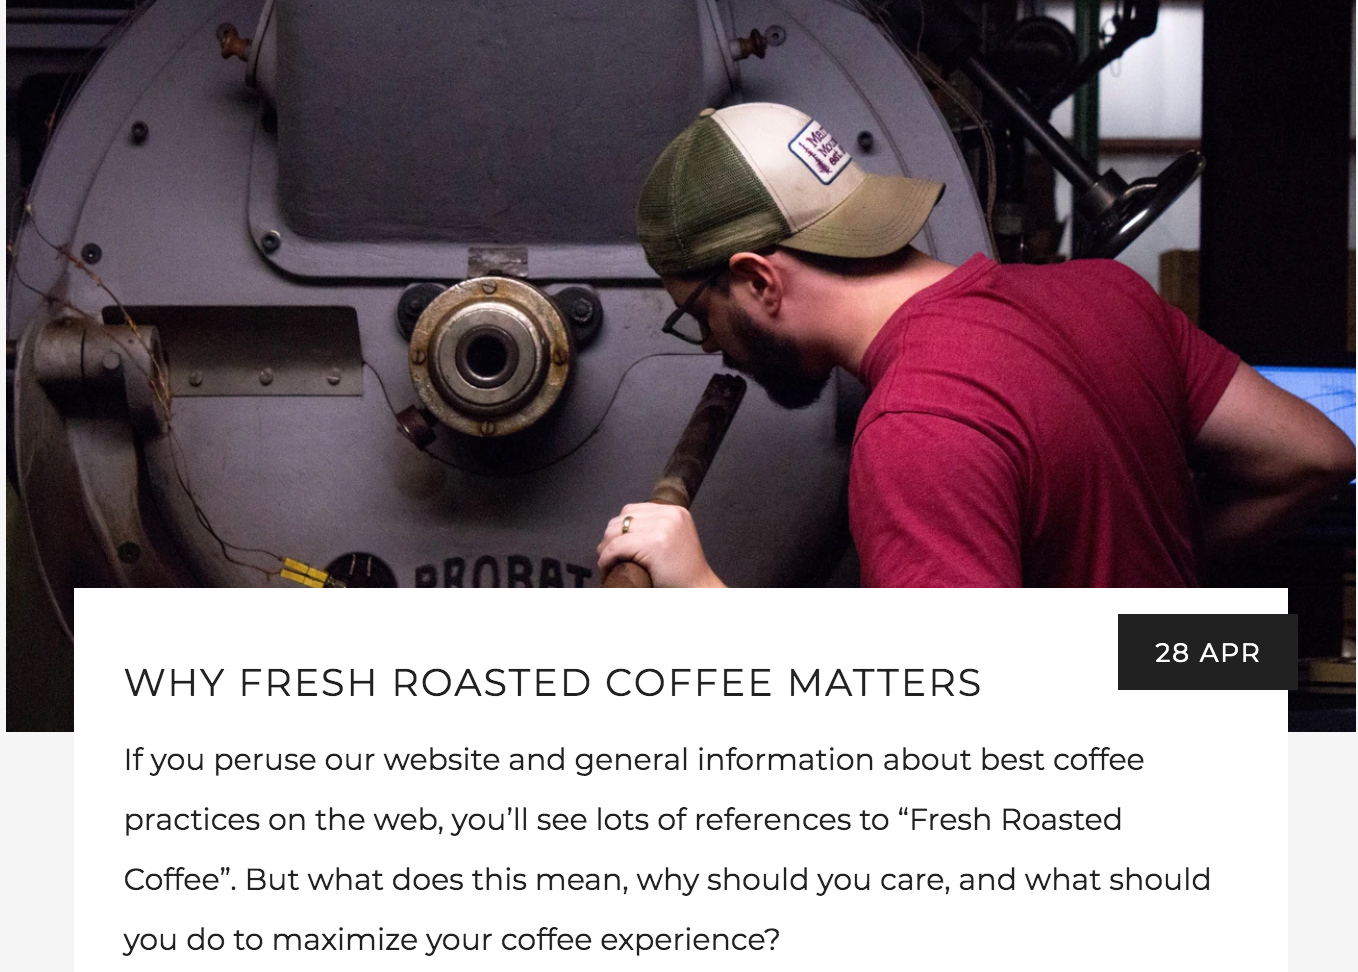 Why Fresh Roasted Coffee Matters Blog, Sniffing the trier of a coffee roaster